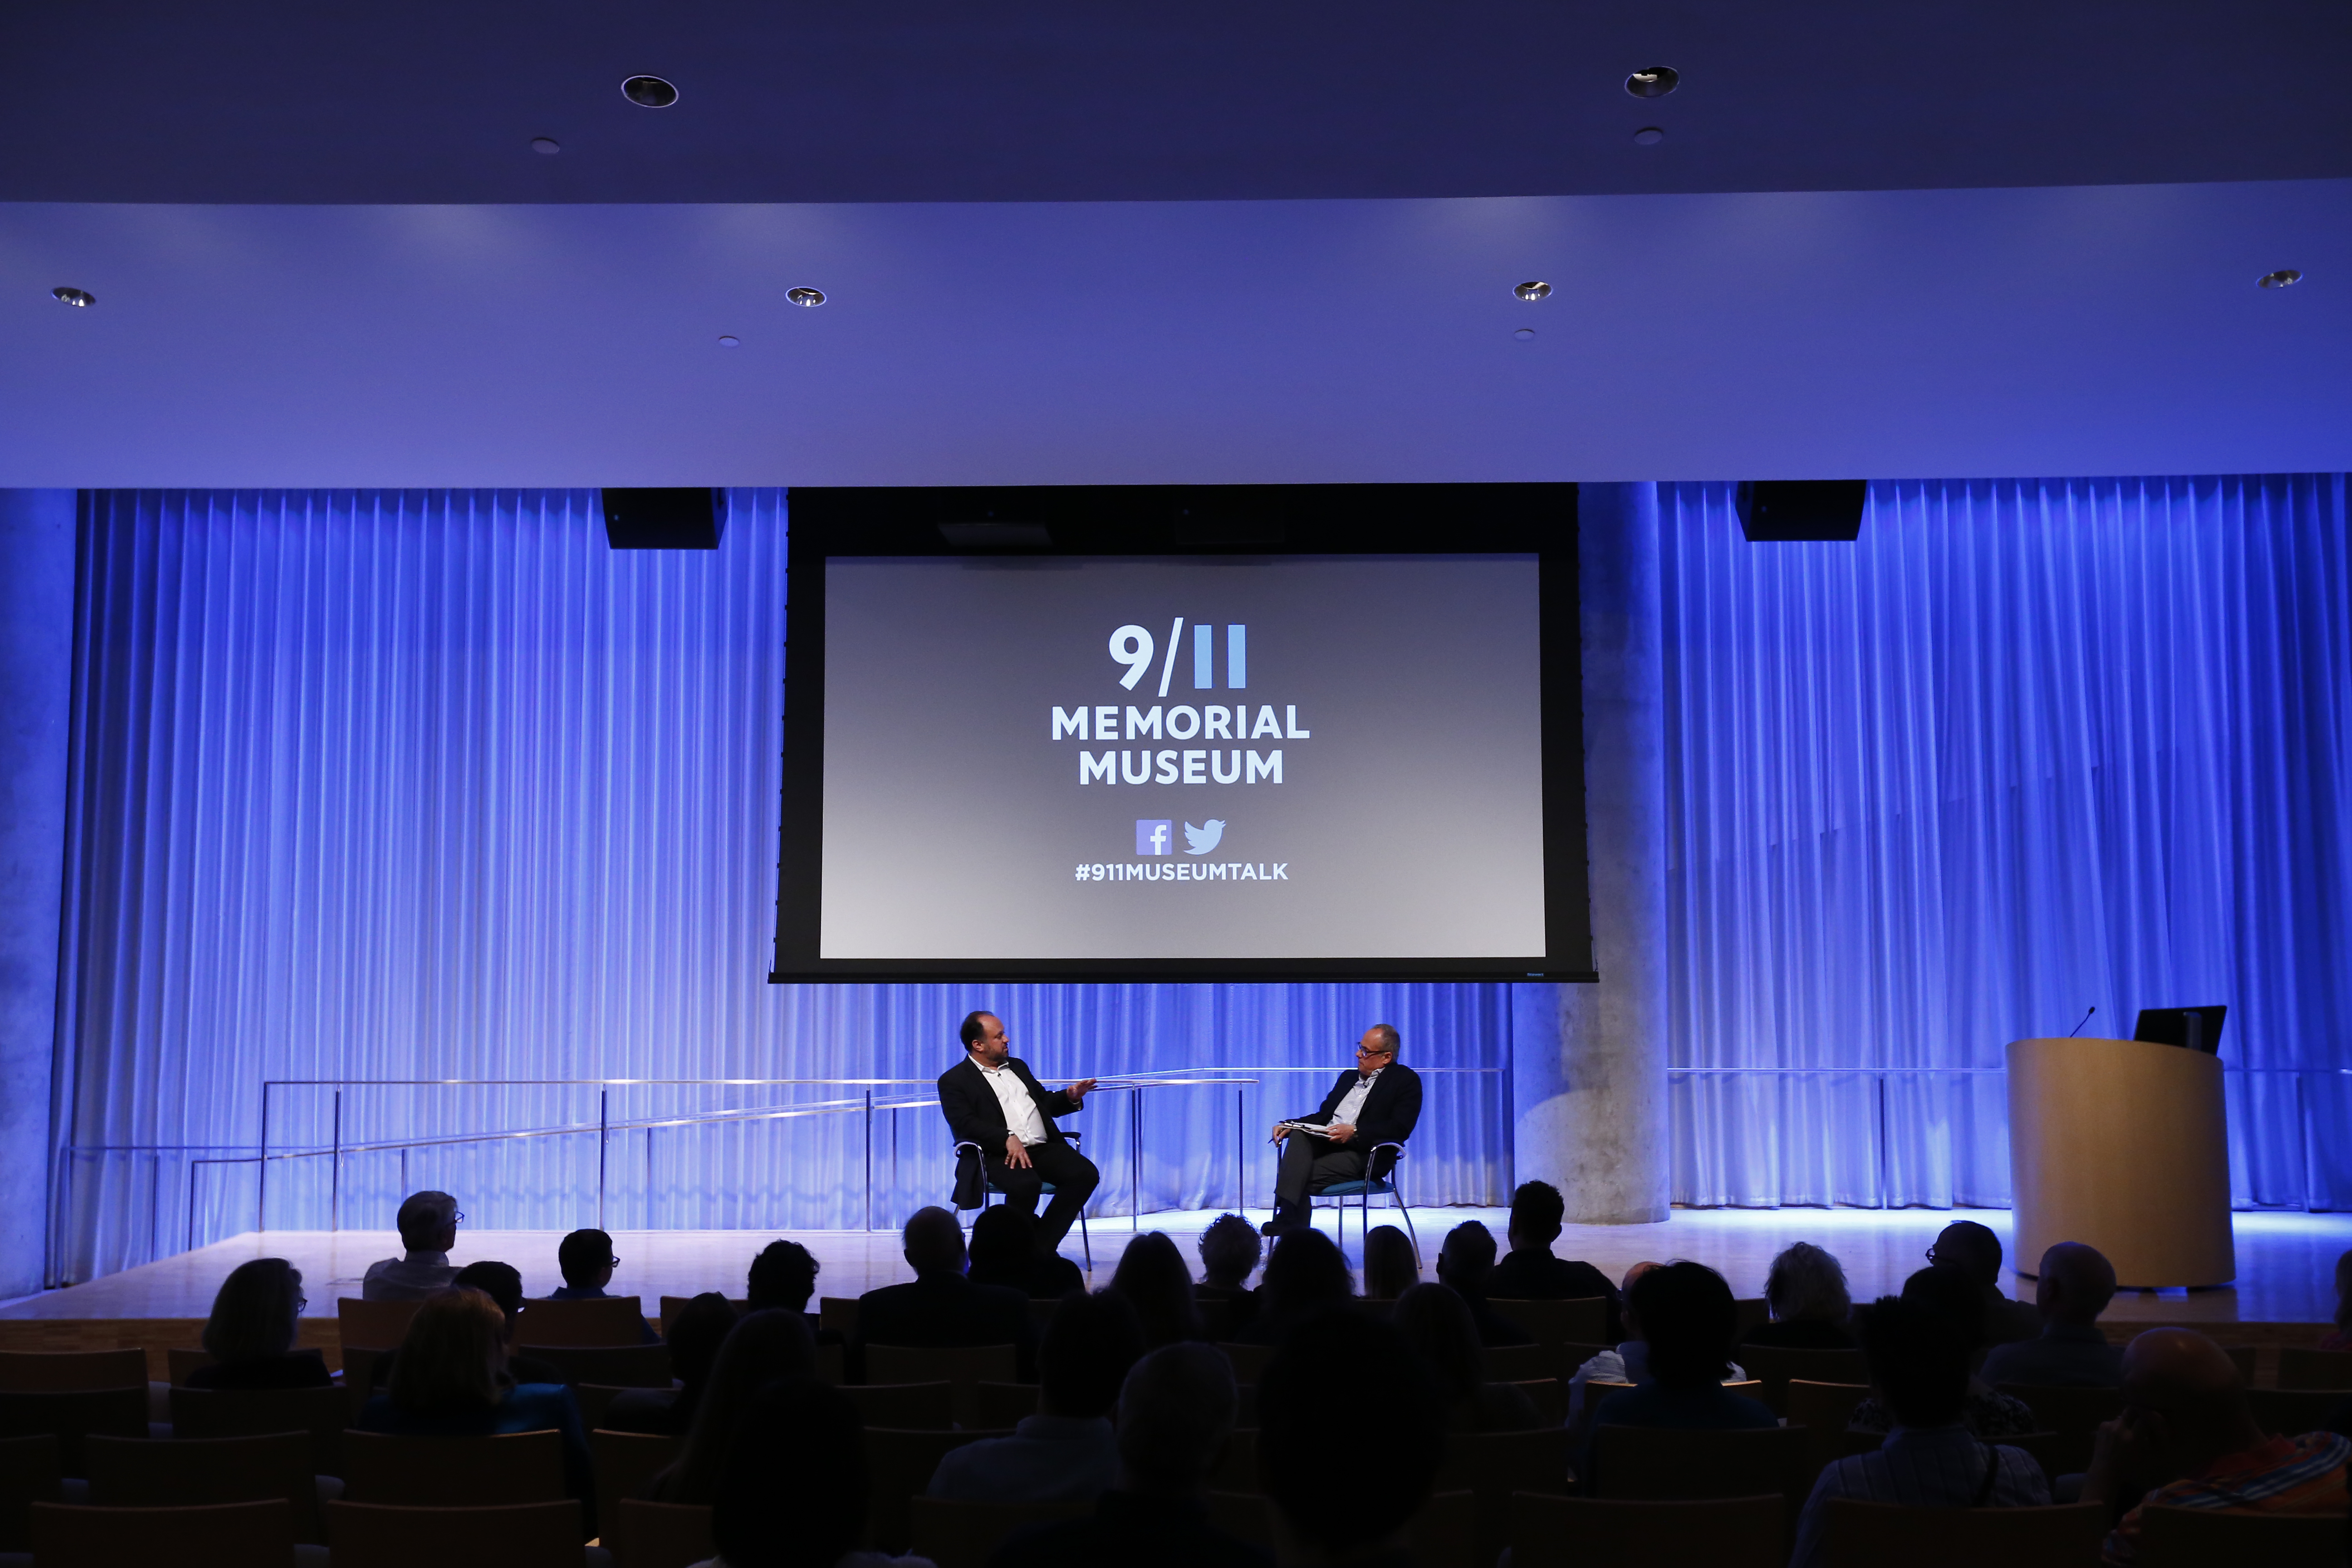 Clifford Chanin and Bernard Haykel speak onstage during a public program at the Museum’s Auditorium.